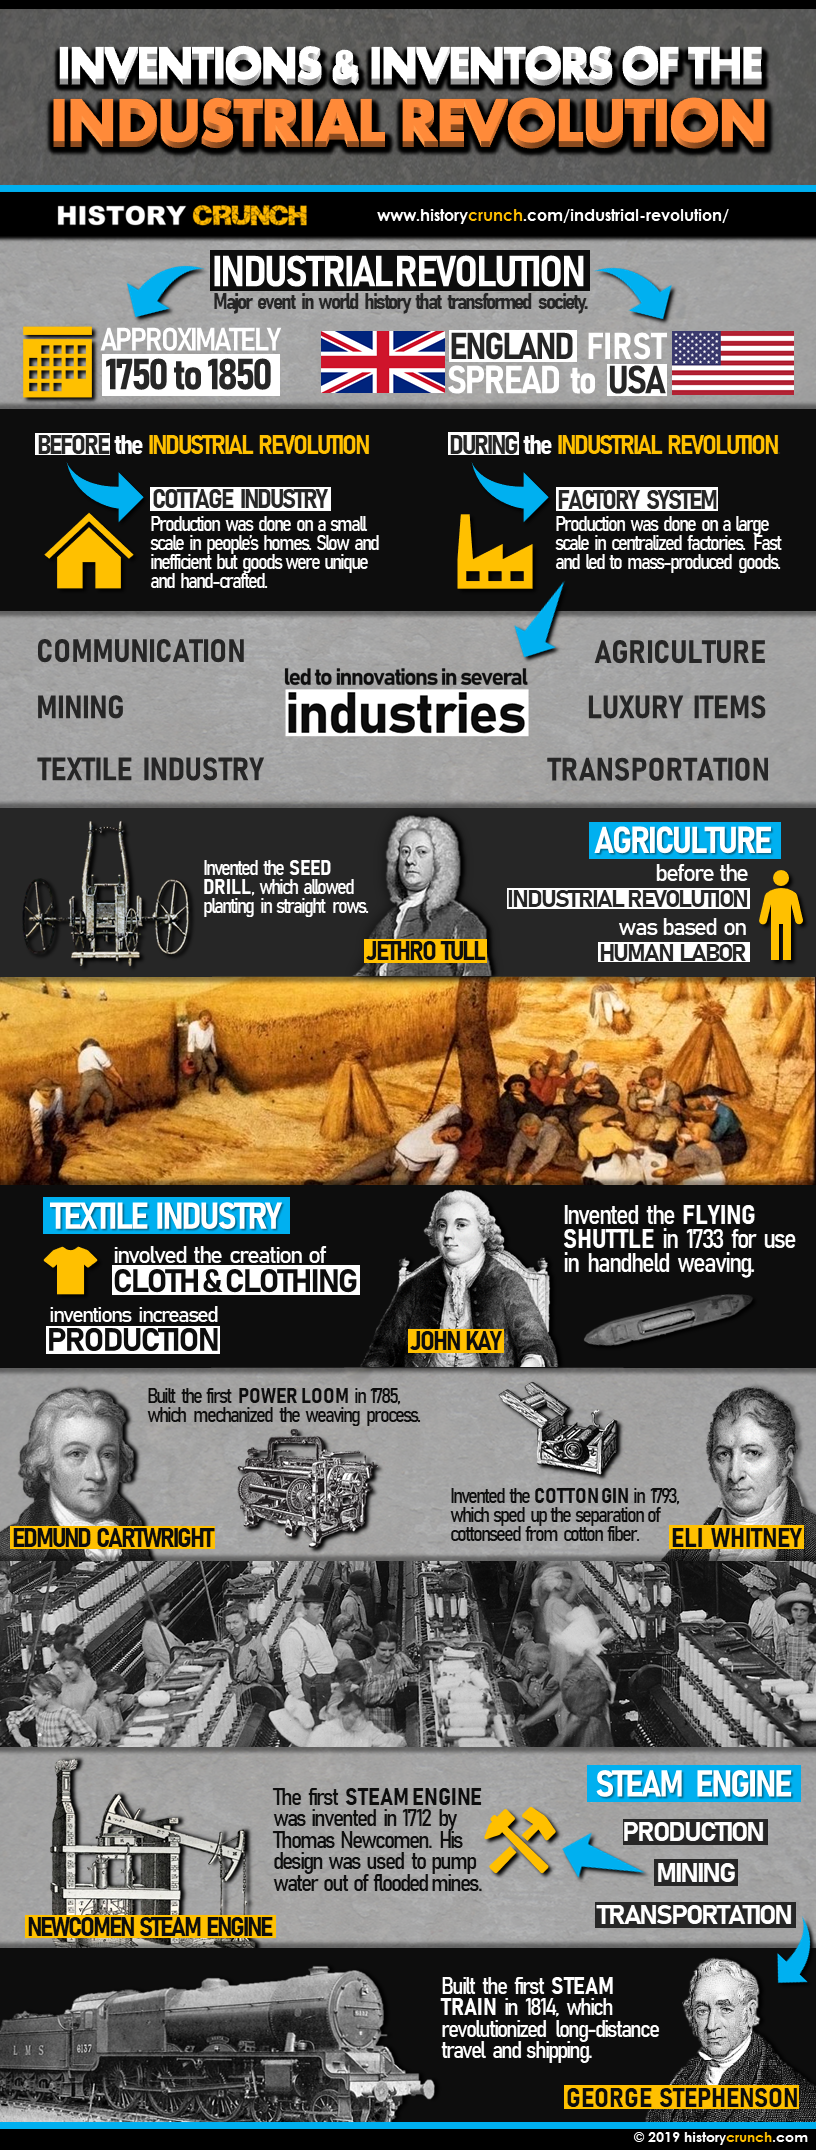 Inventions and Inventions of the Industrial Revolution Infographic